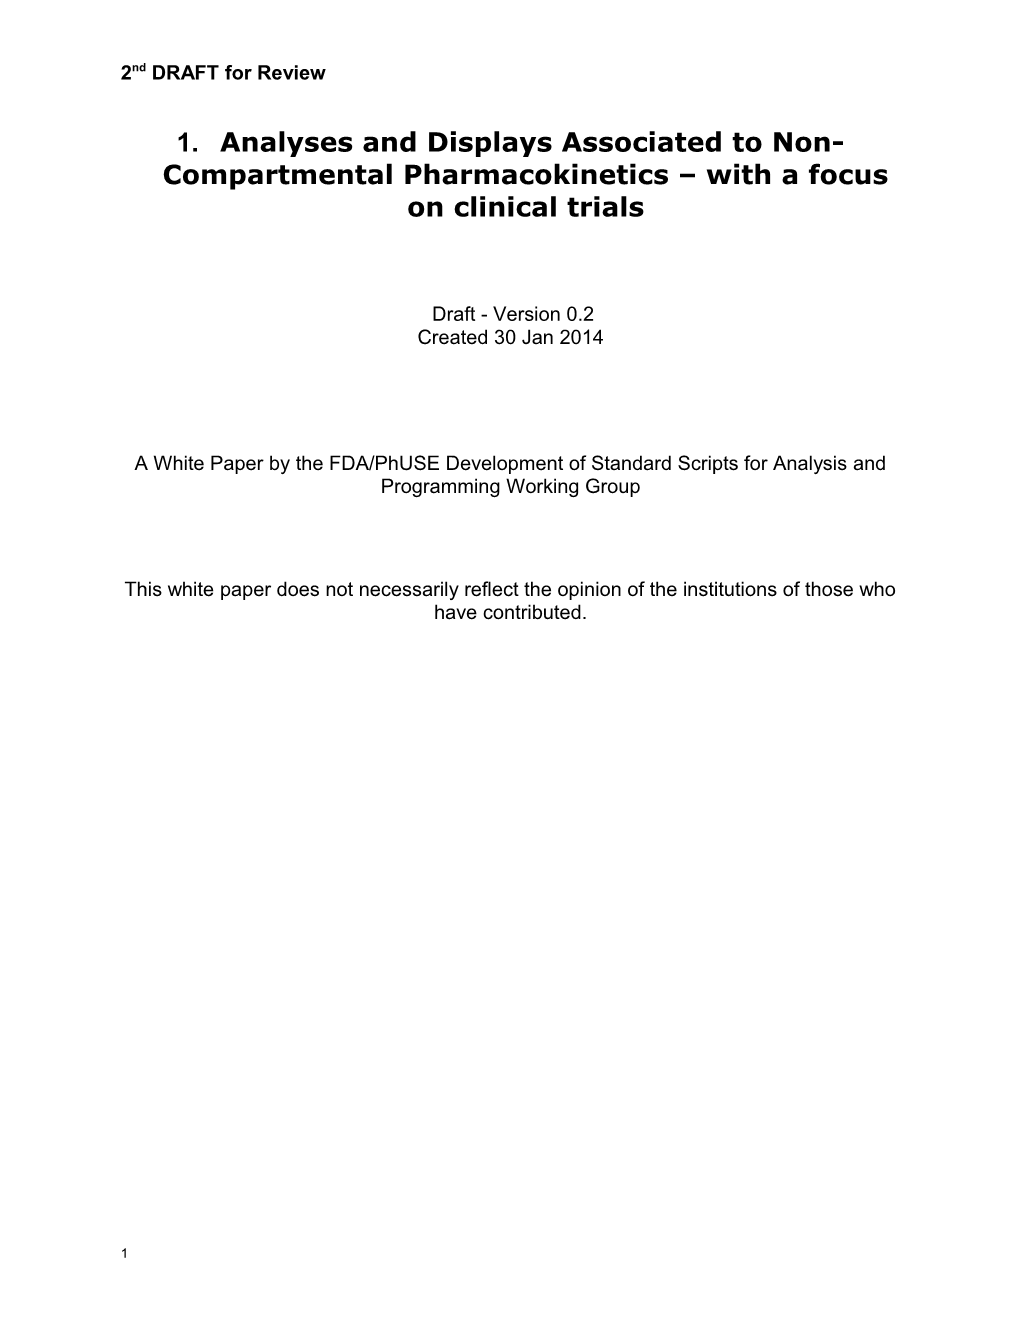 1. Analyses and Displays Associated to Non-Compartmental Pharmacokinetics with a Focus